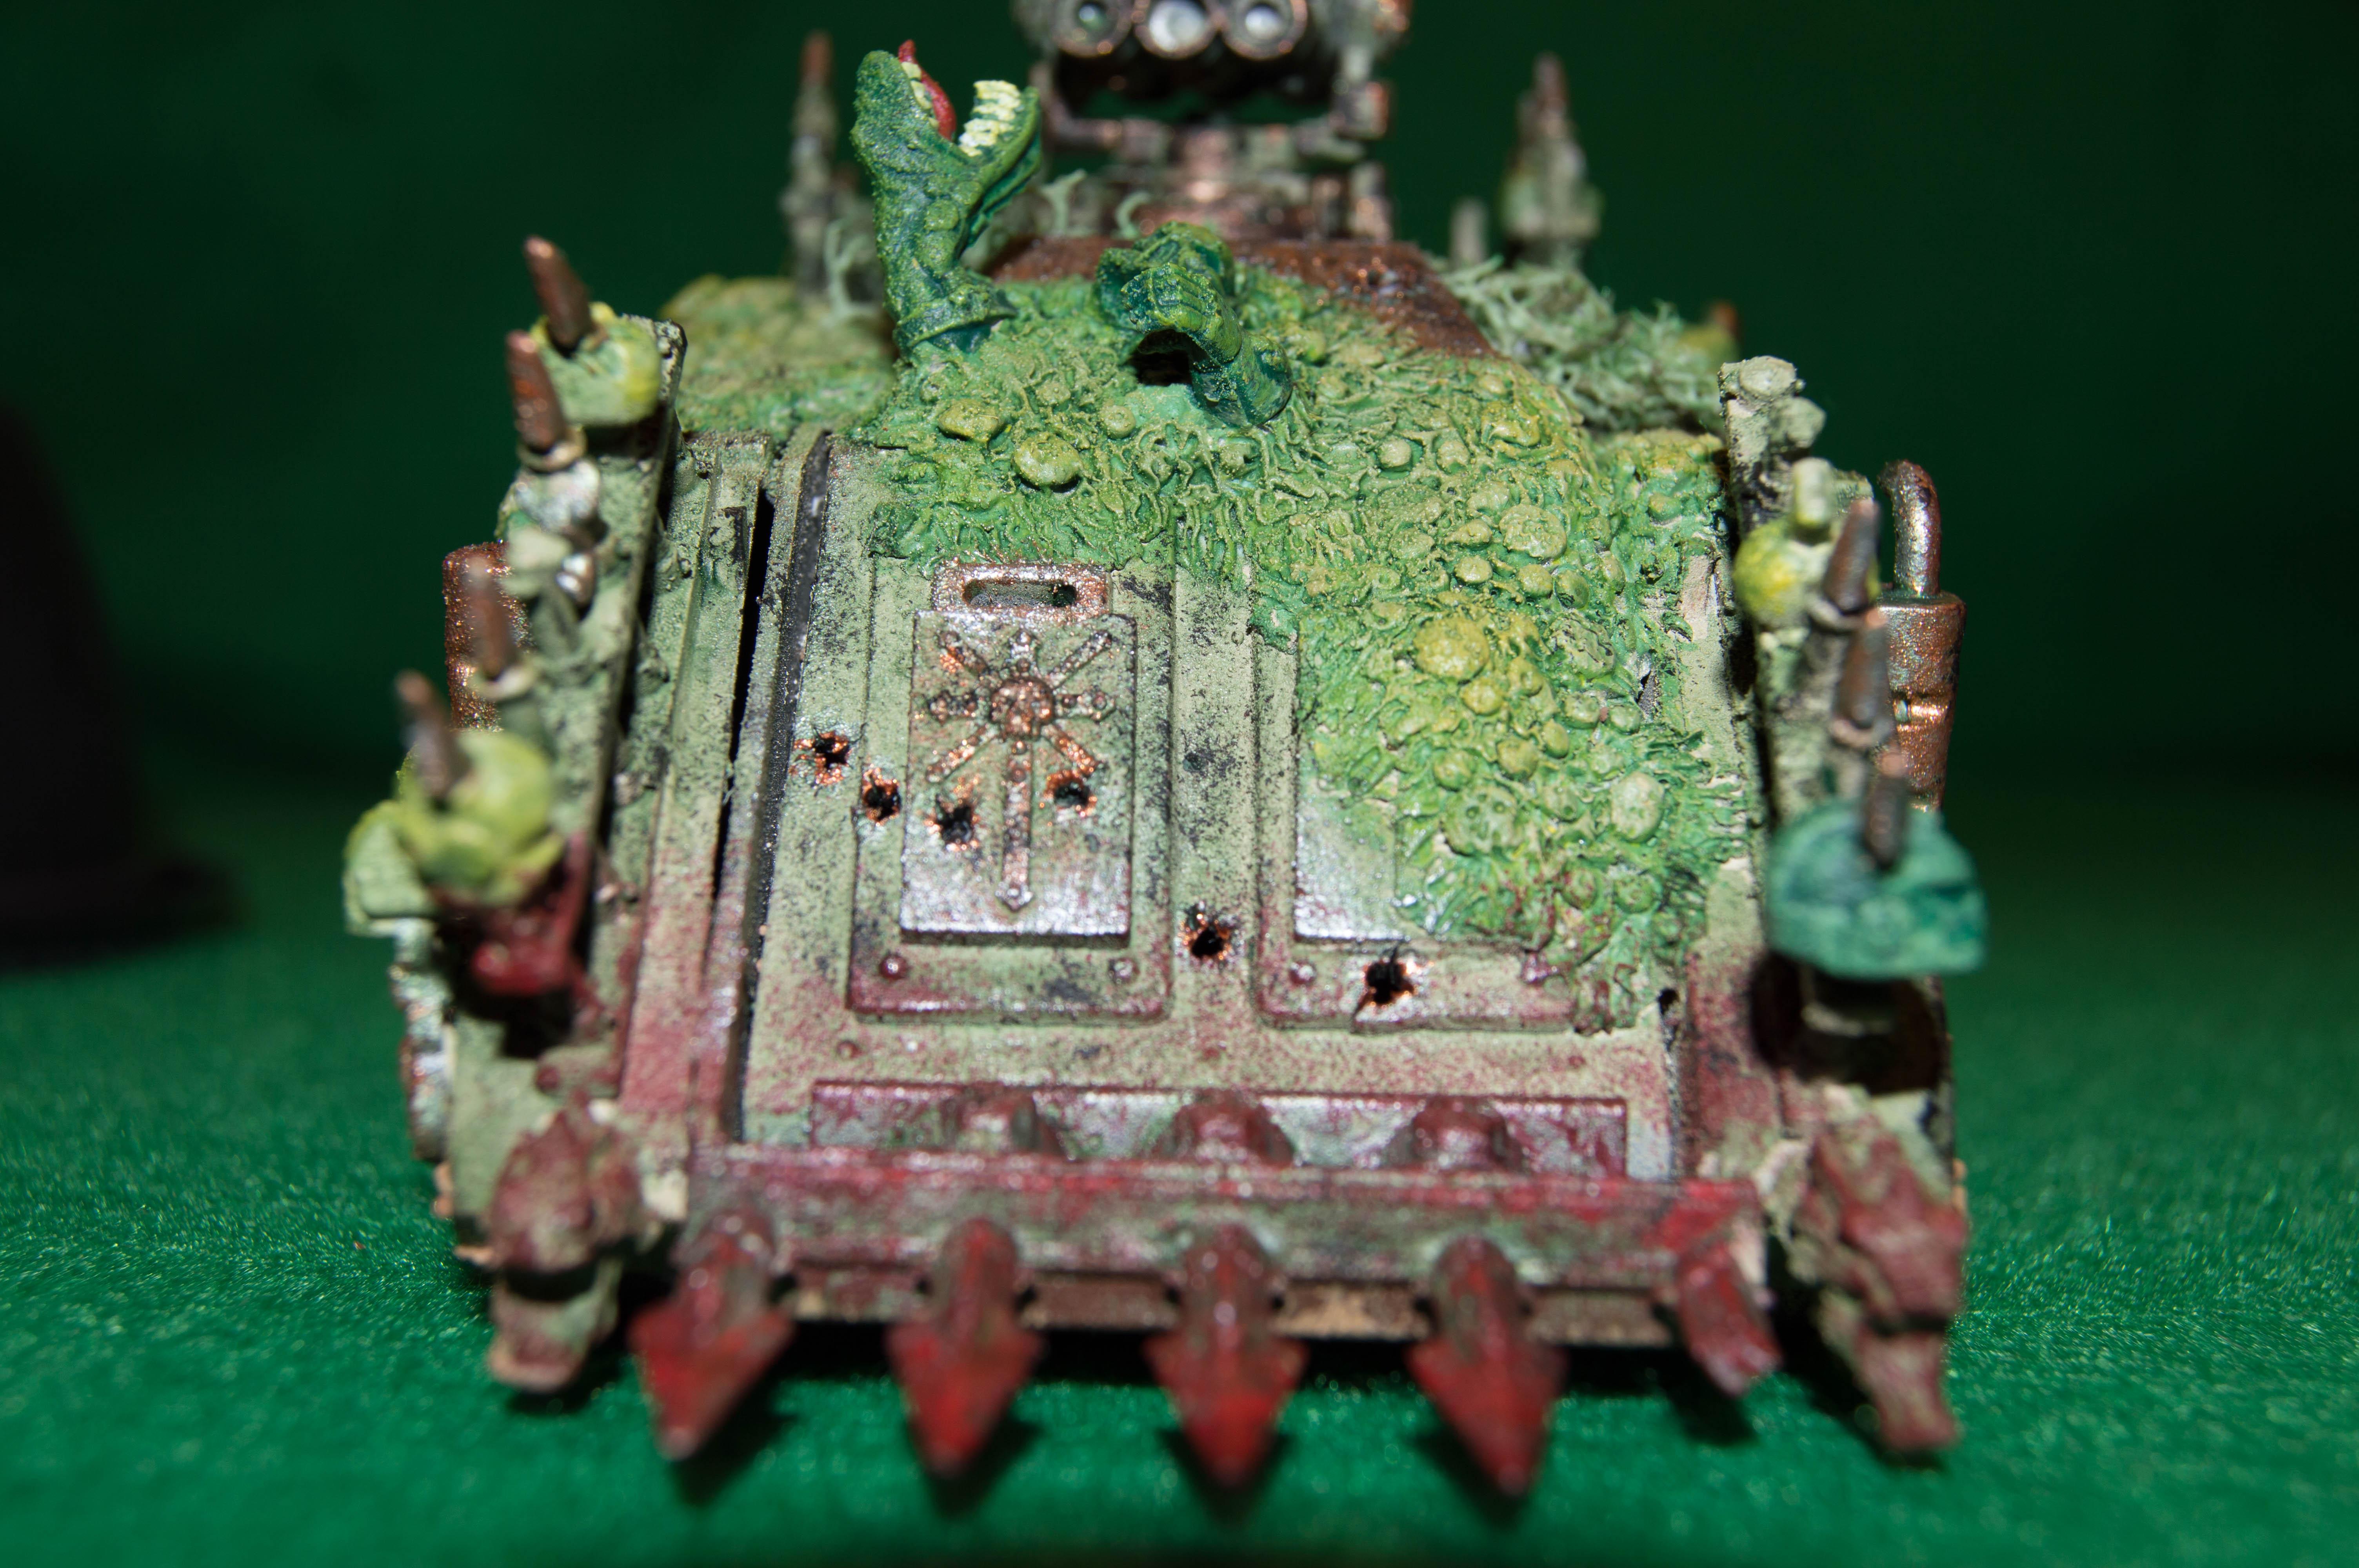 Chaos Daemons, Chaos Space Marines, Decay, Greenstuff, Nurgle, Rust, Transport, Vehicle, Warhammer 40,000, Wear, Weathered